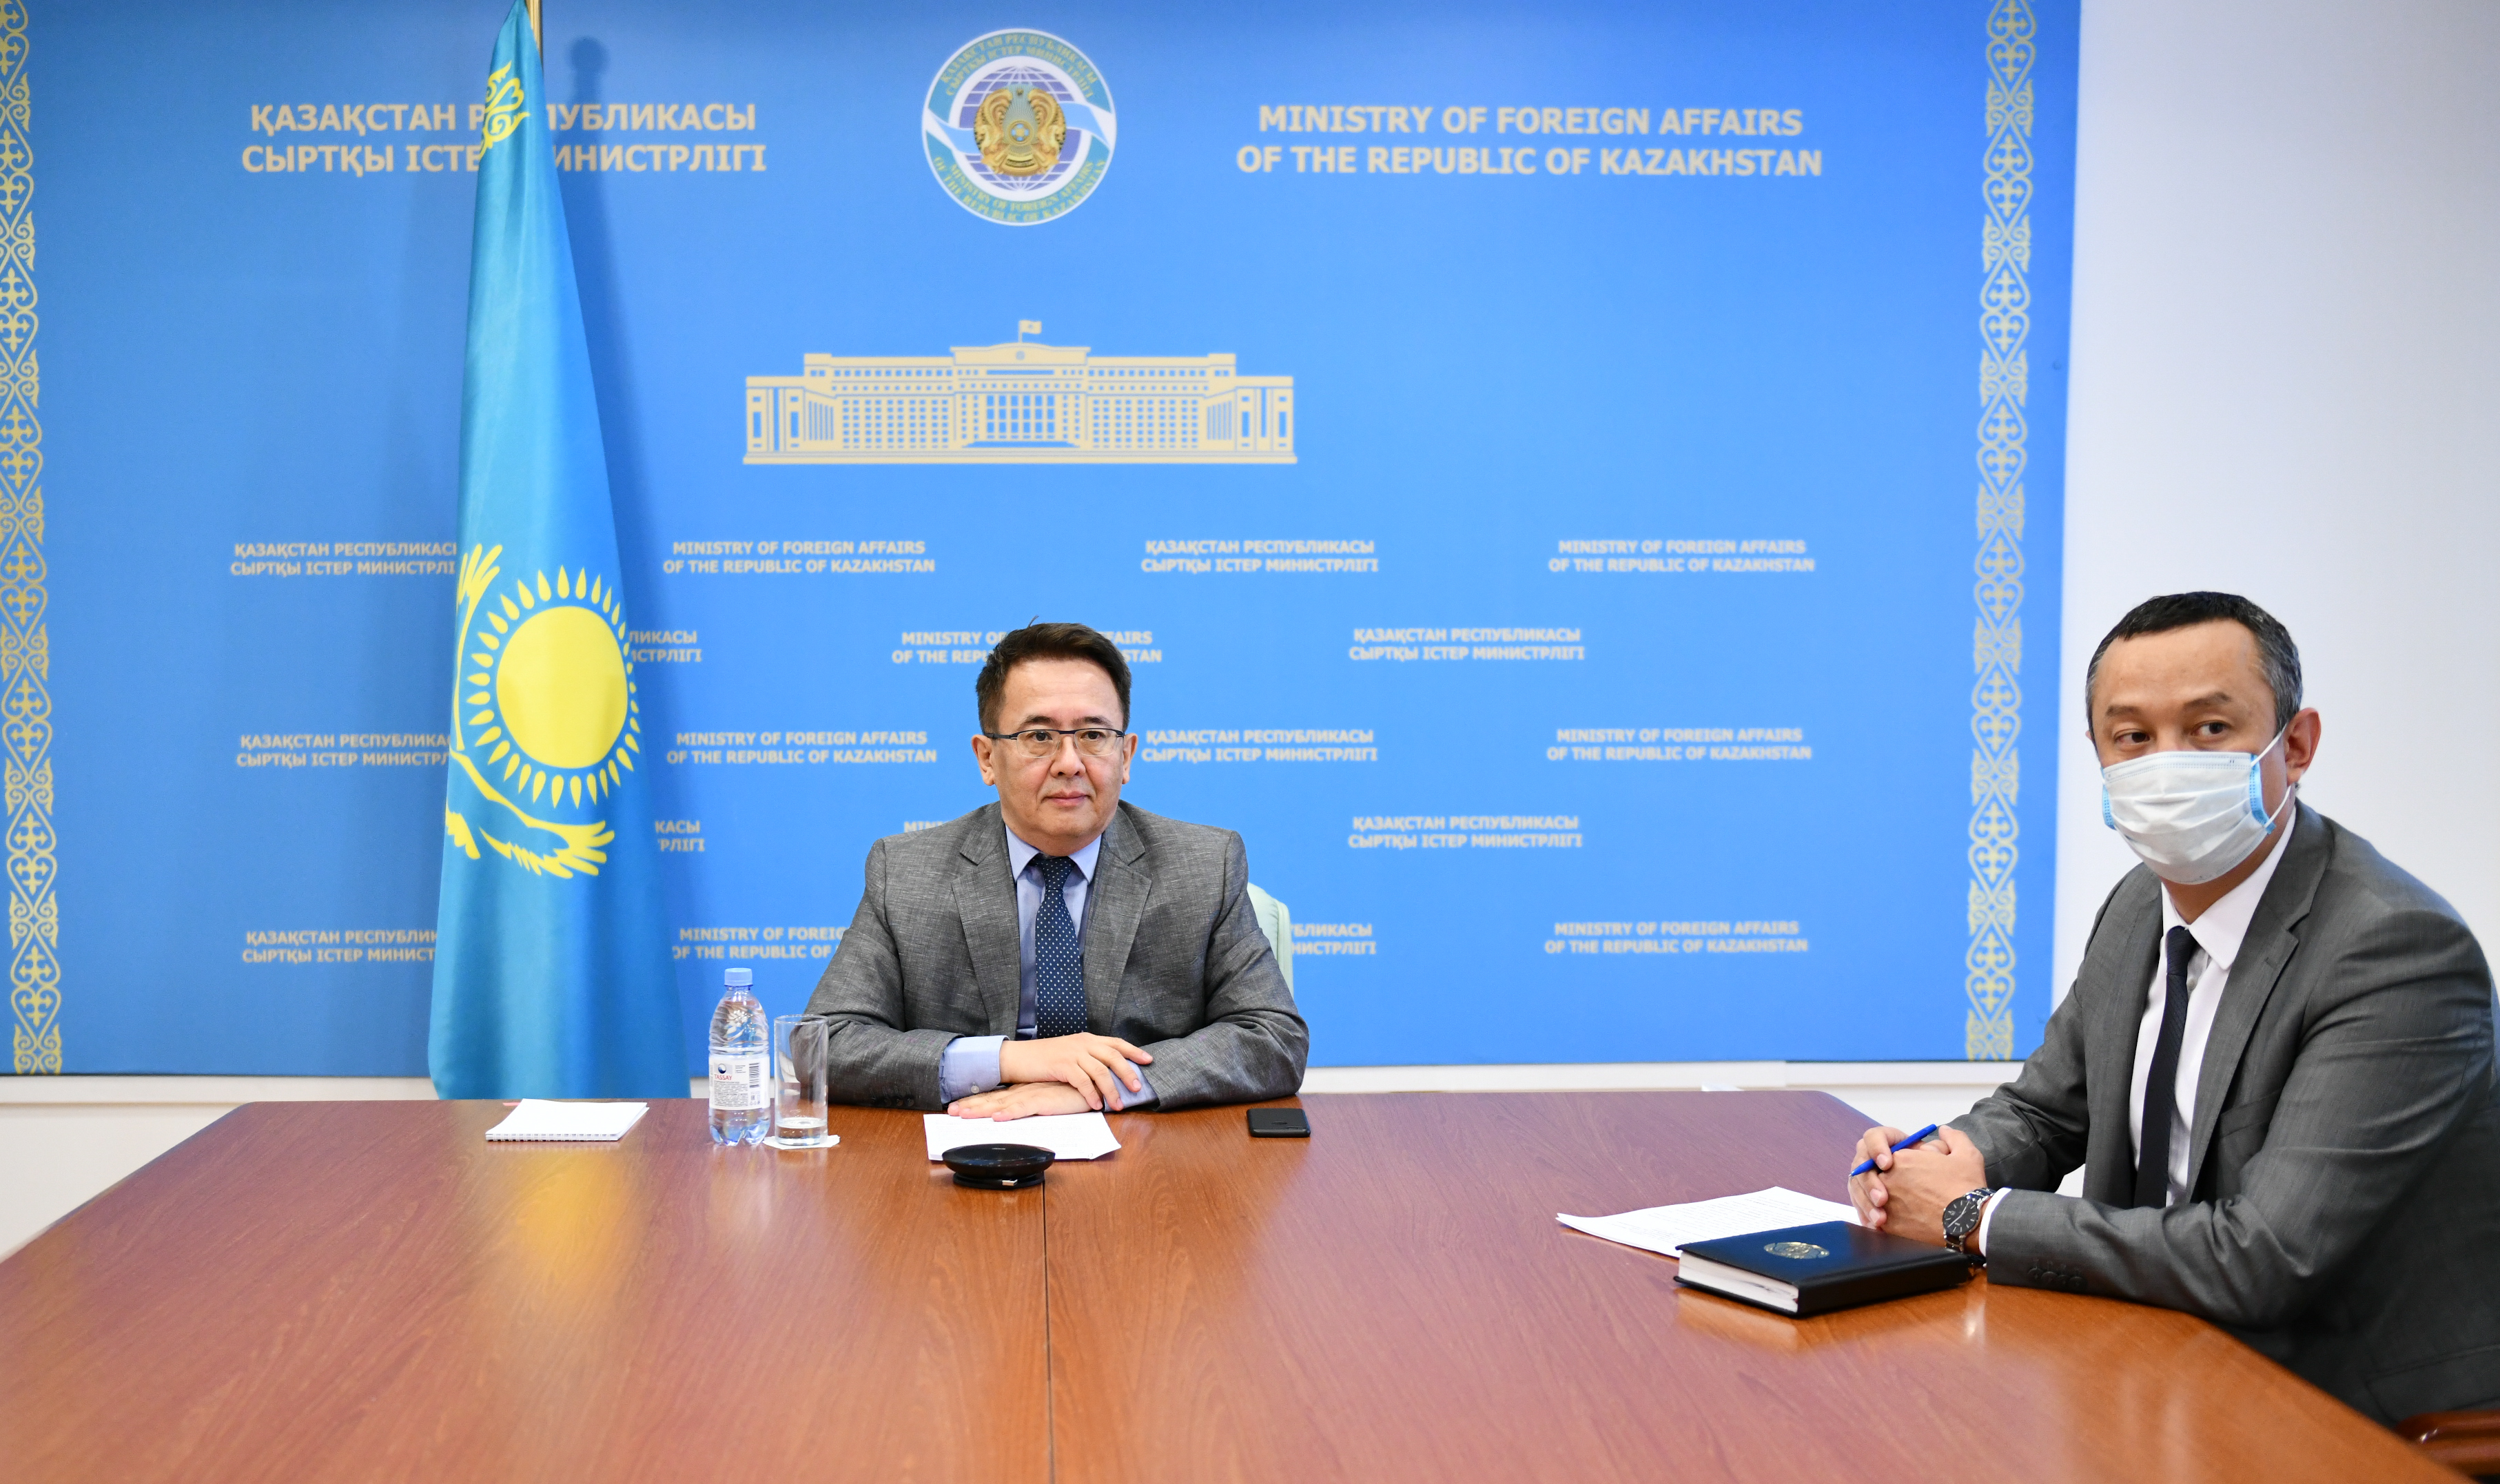 Kazakhstan took part in the UN Meeting on the Humanitarian Situation in Afghanistan